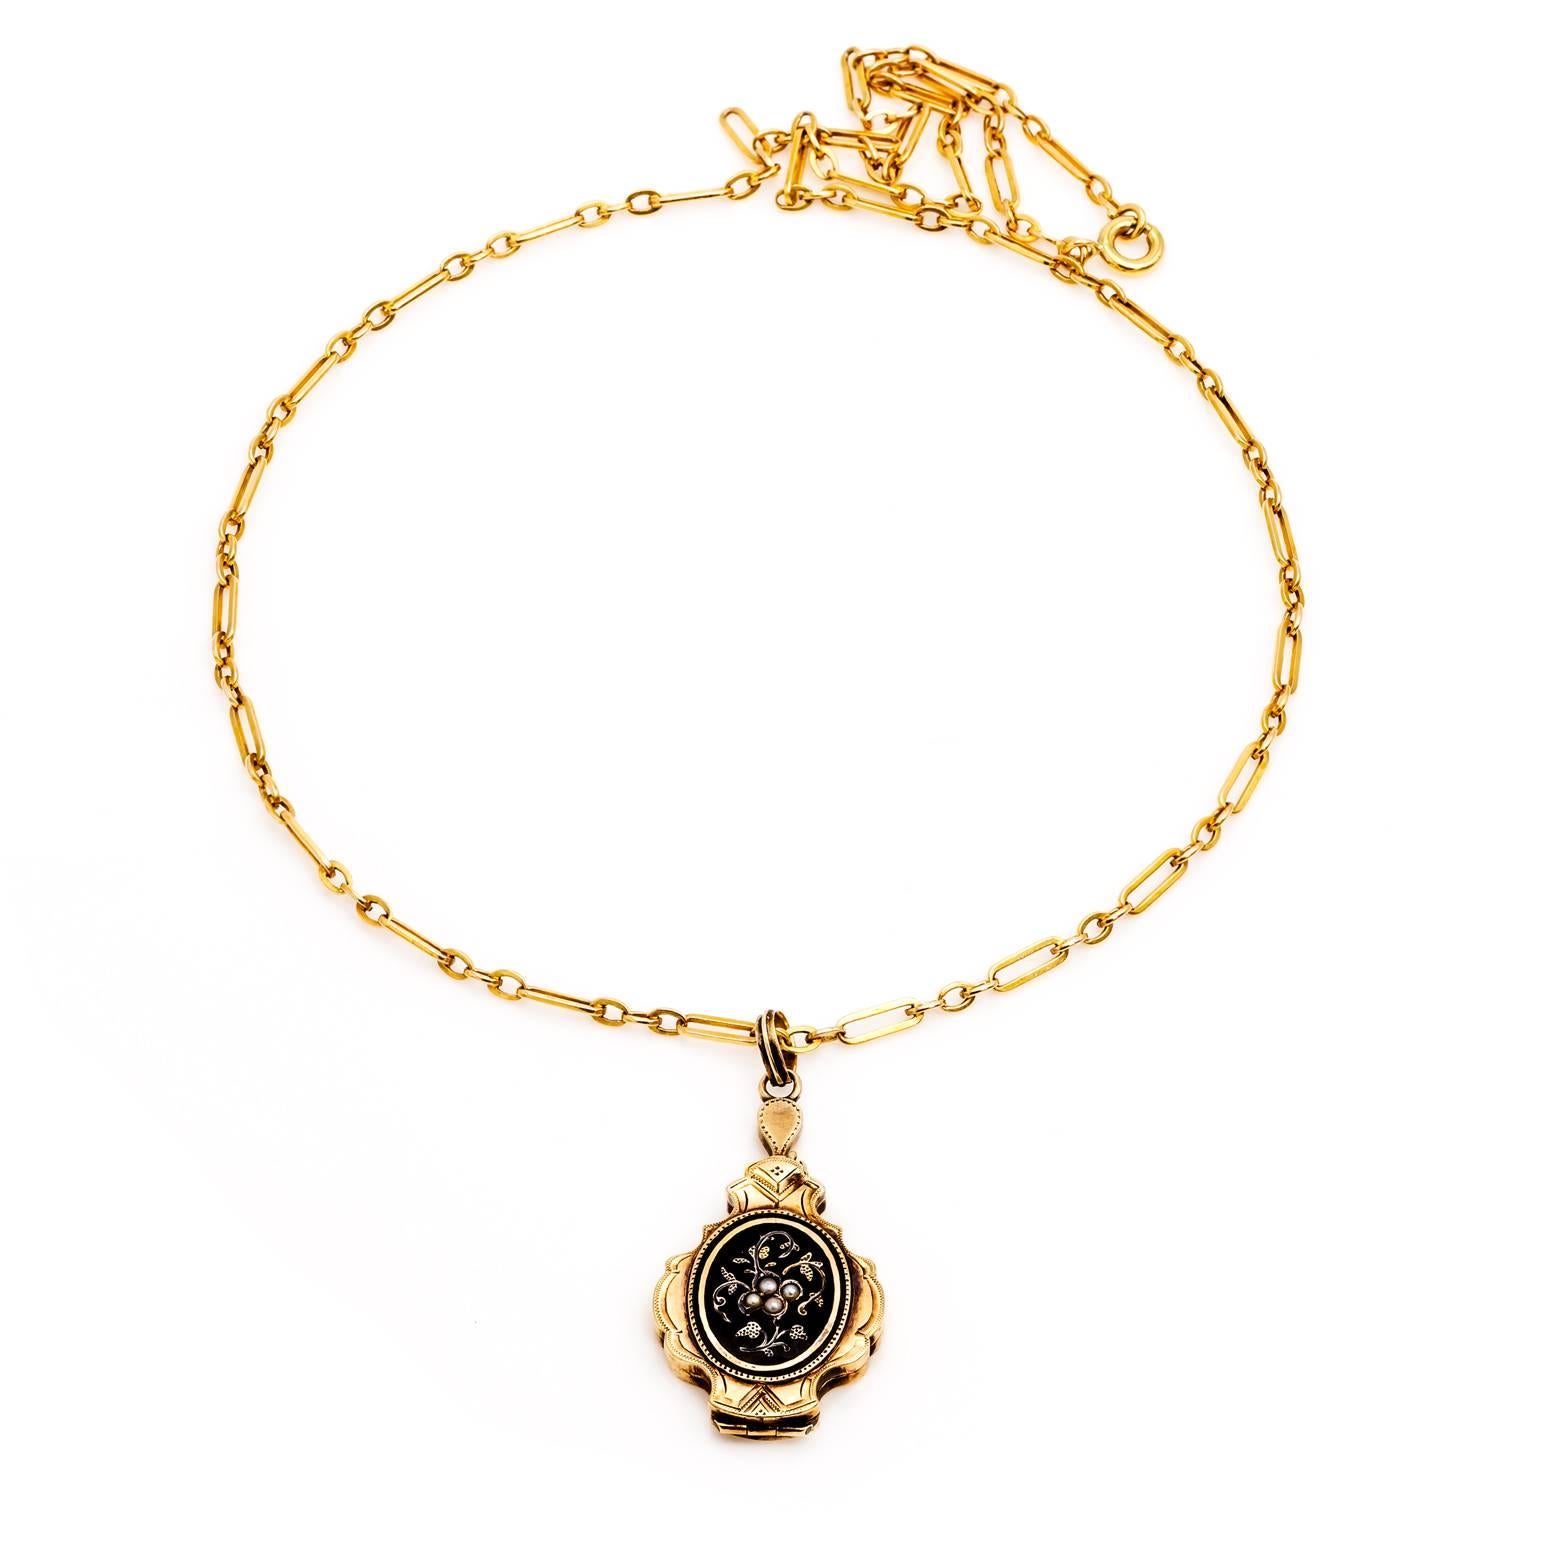 This intricate and unique locket is decorated in black enamel, fresh water pearls and engraved in gold. The antique locket opens up top to bottom giving it an exceptional quality that sings of greatness. In excellent condition and absolutely